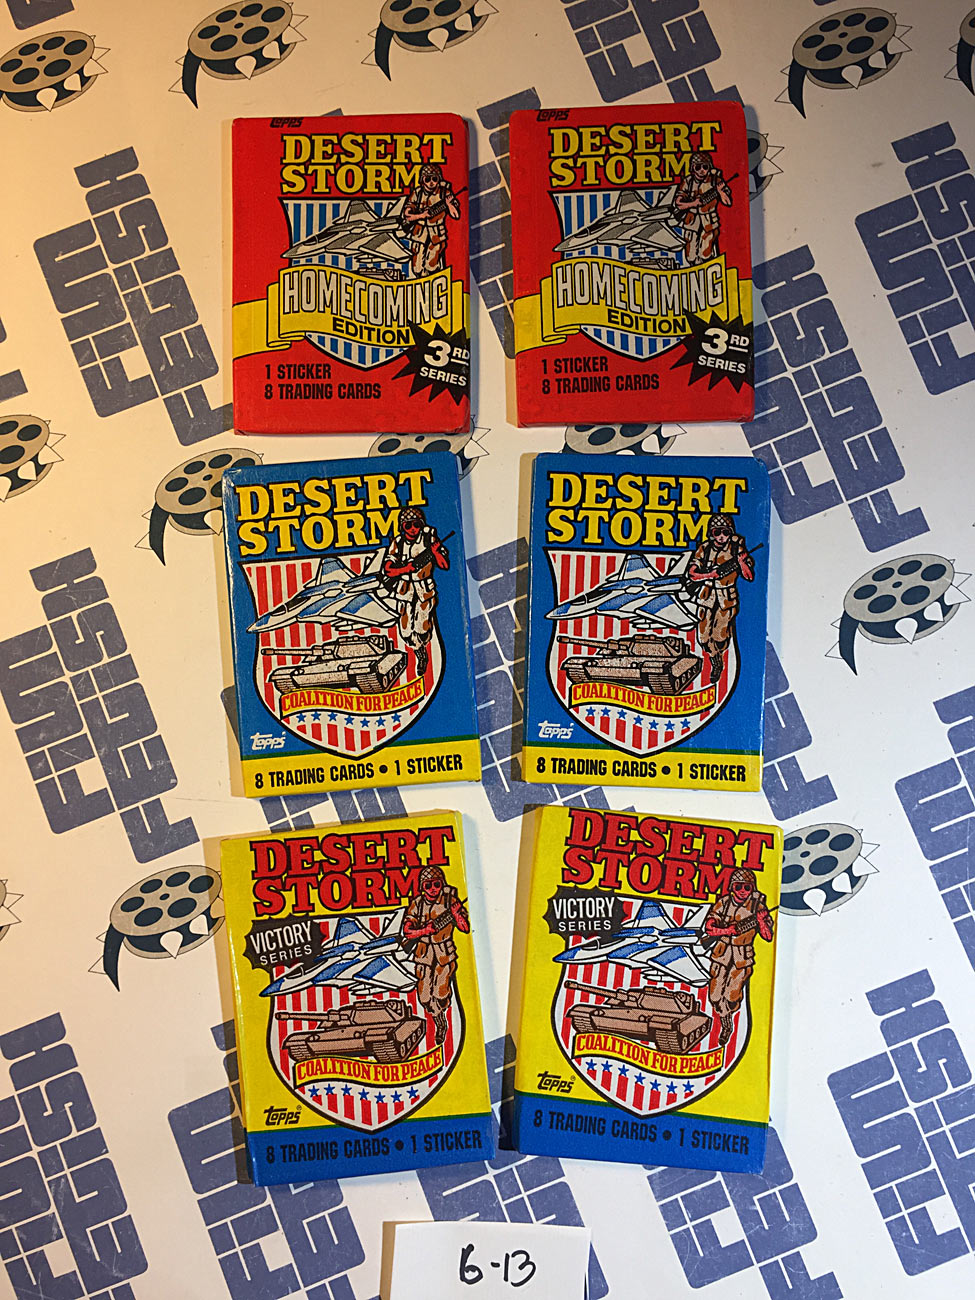 Set of 6 Sealed Topps Desert Storm Trading Card Wax Packs, Homecoming, Coalition For Peace, Victory Series [613]